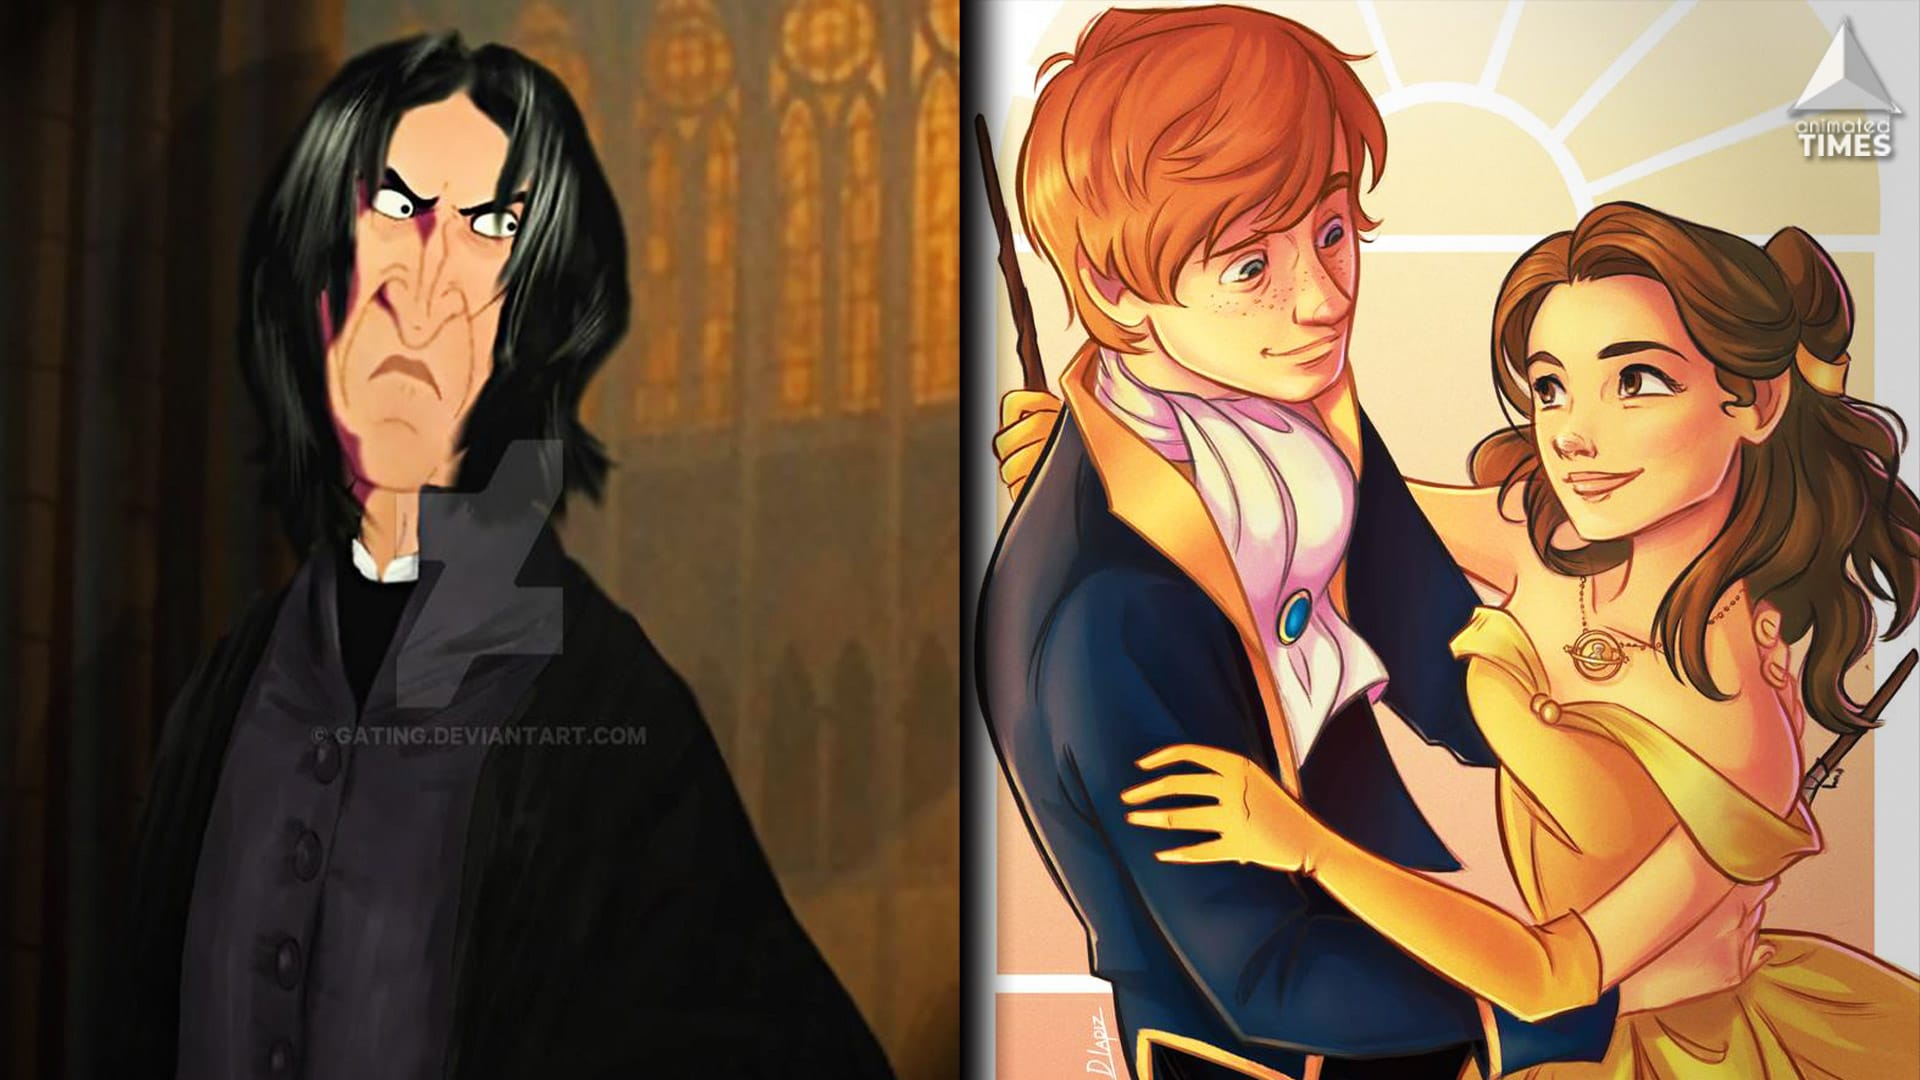 Harry Potter Disnefyied : 10 Character Crossovers From Harry Potter To Disney